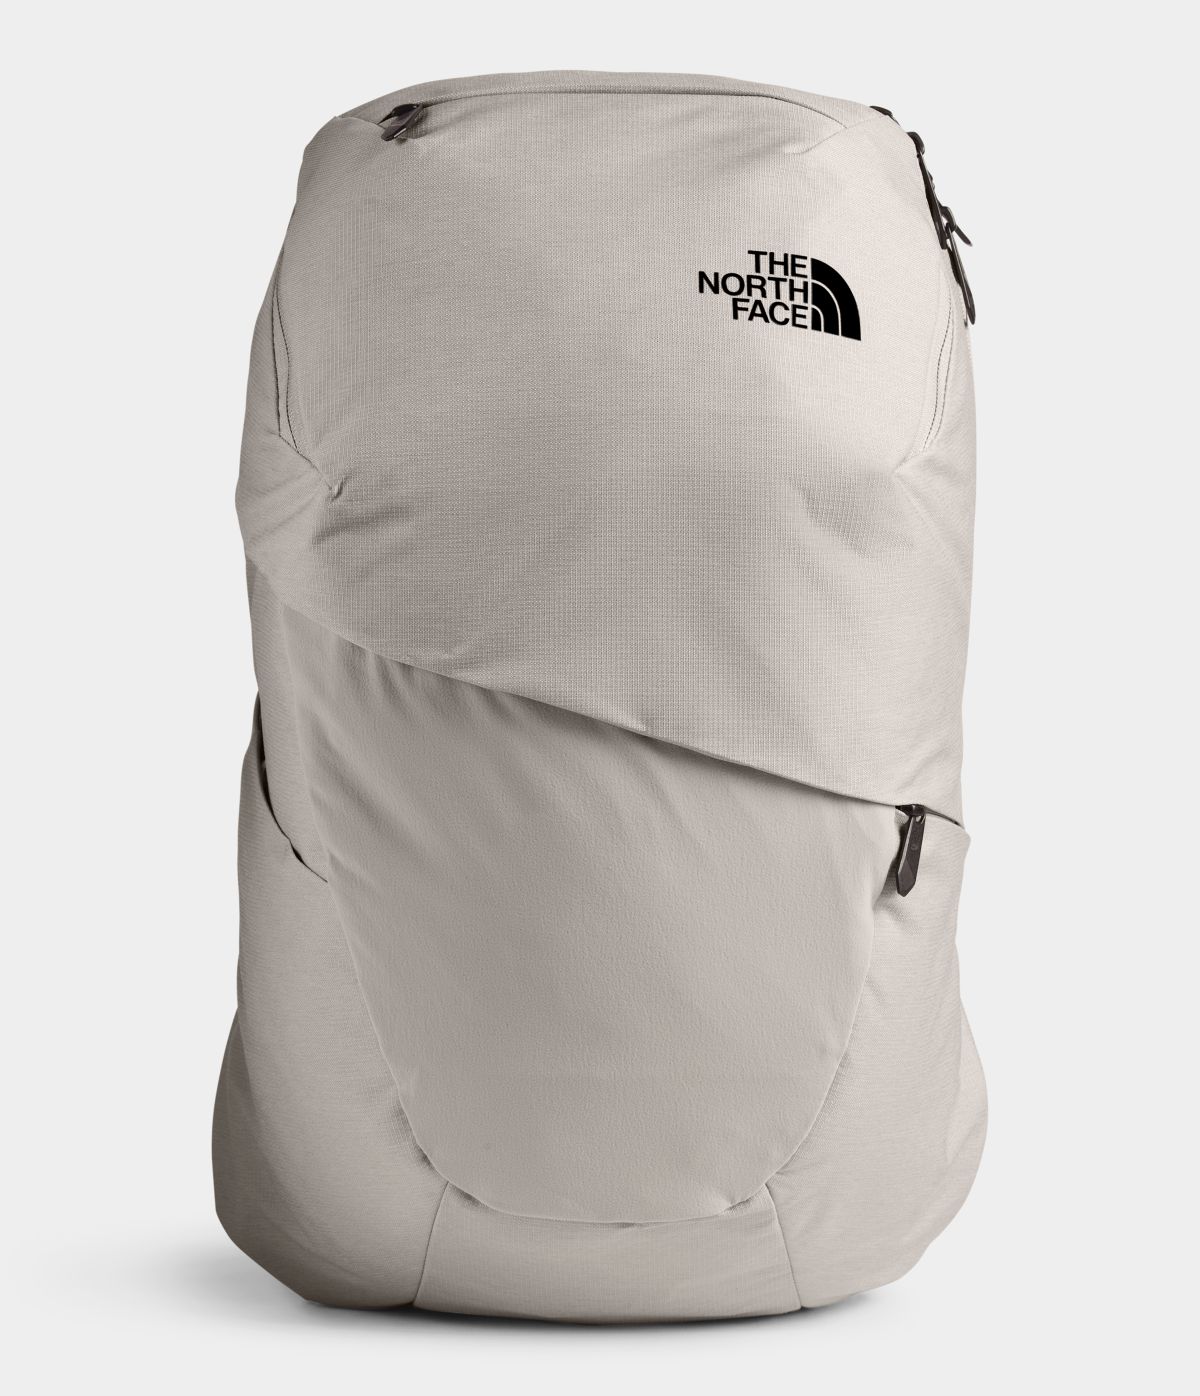 Women's The North Face Aurora Backpack in Dove Grey Dark Heather/Crockery Beige from front view